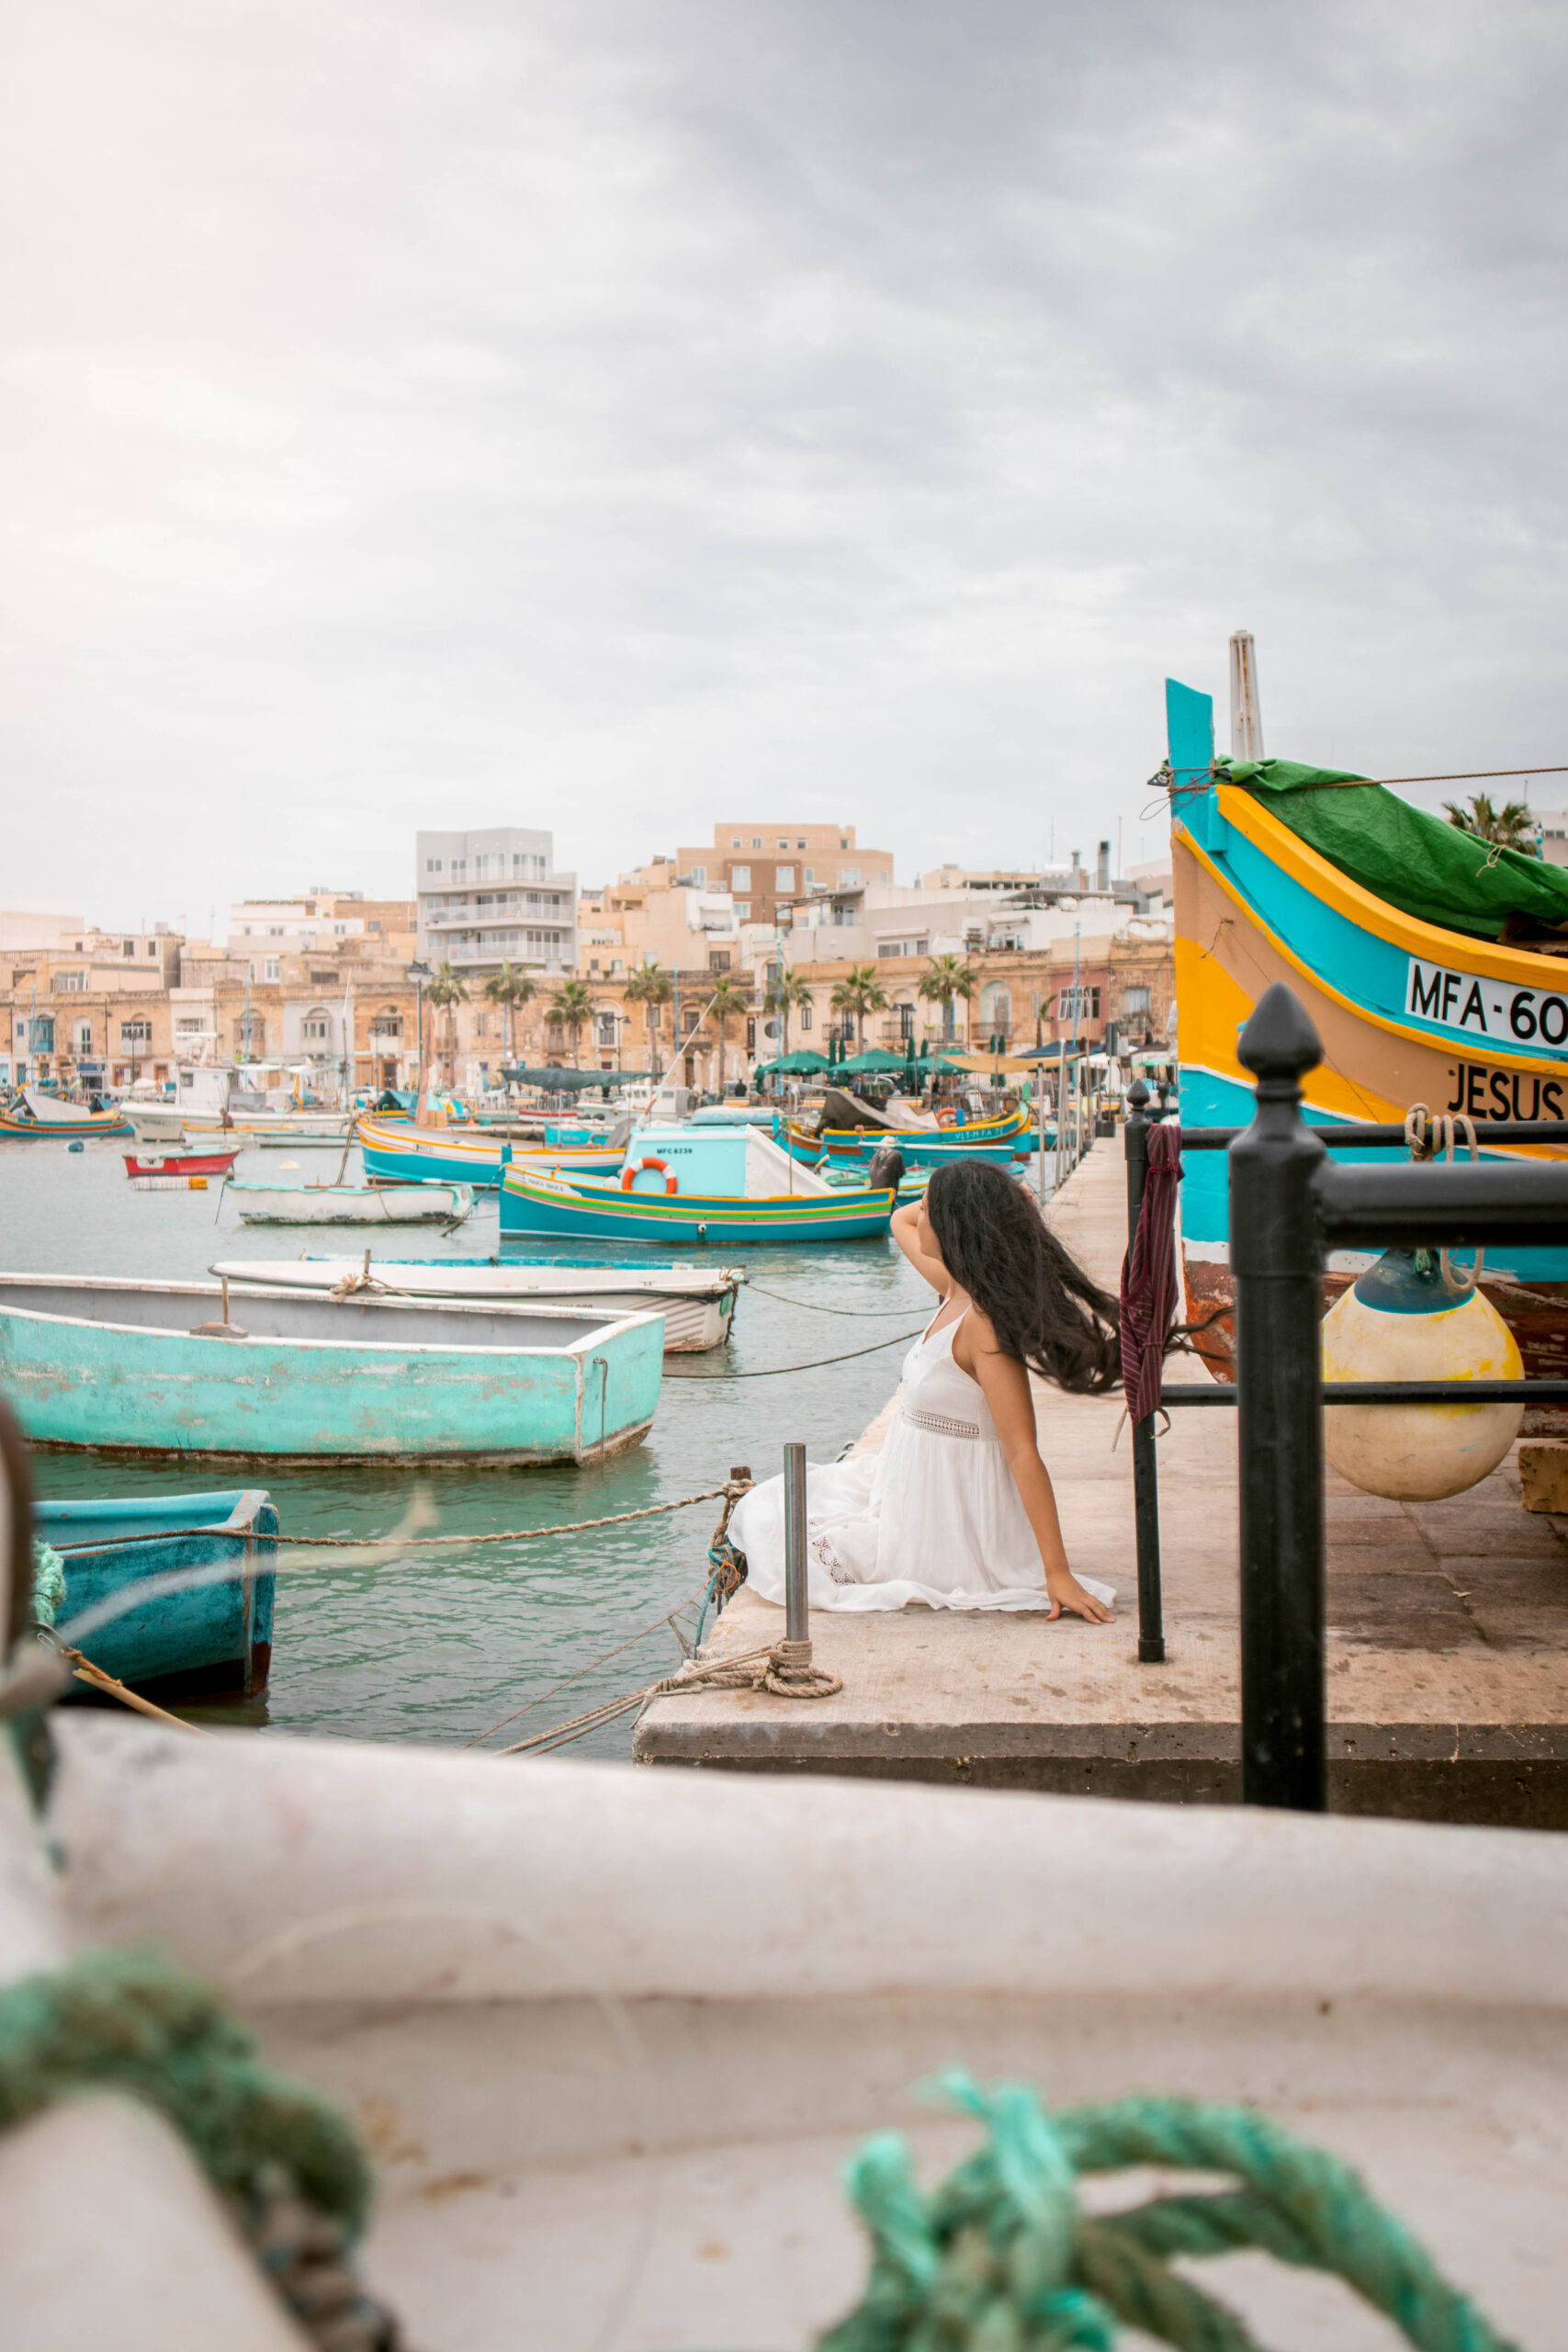 Woman wearing a white dress sitting in Marsaxlokk Harbour, Malta watching the waterfront on traditional colourful luzzu boats